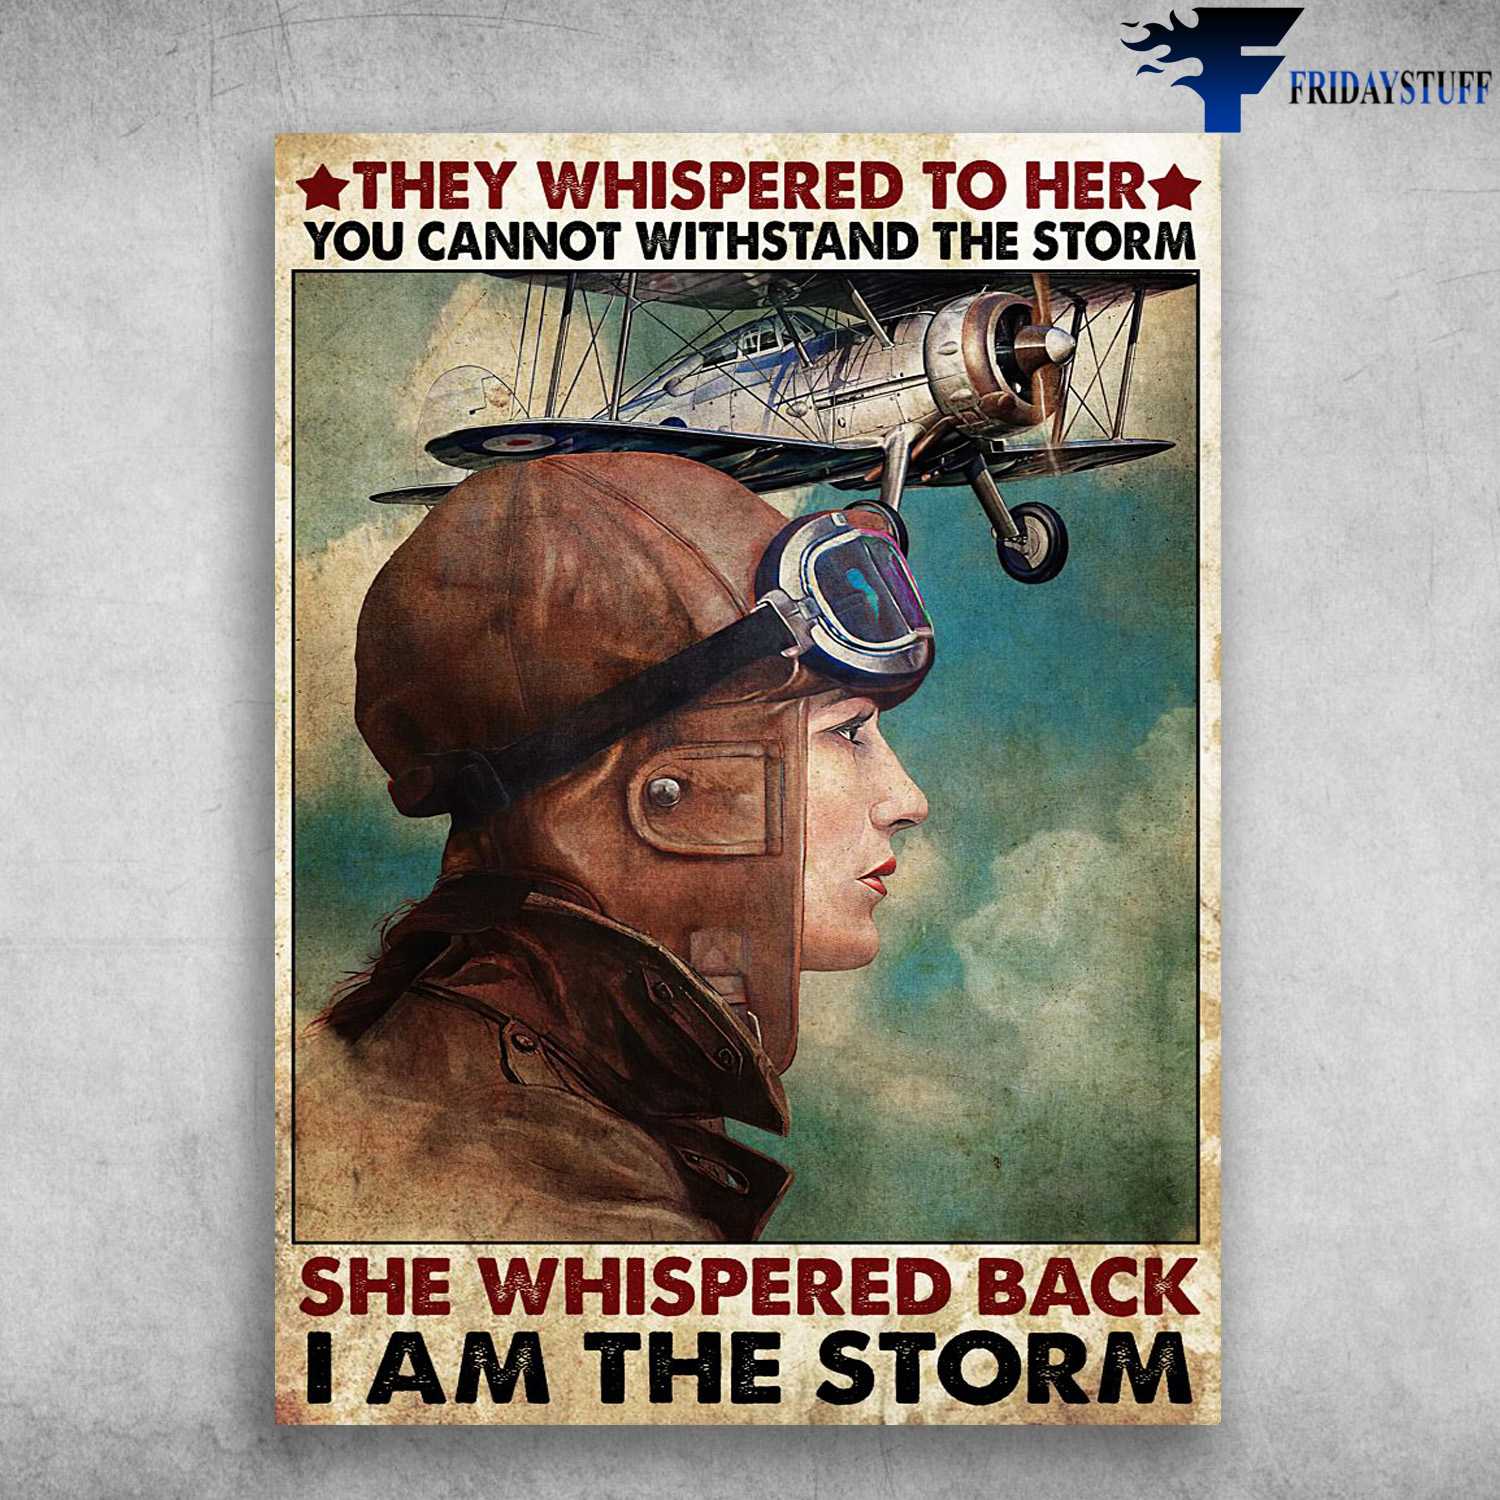 Female Pilot - They Whispered To Her, You Cannot Withstand The Storm, She Whispered Back, I Am The Storm